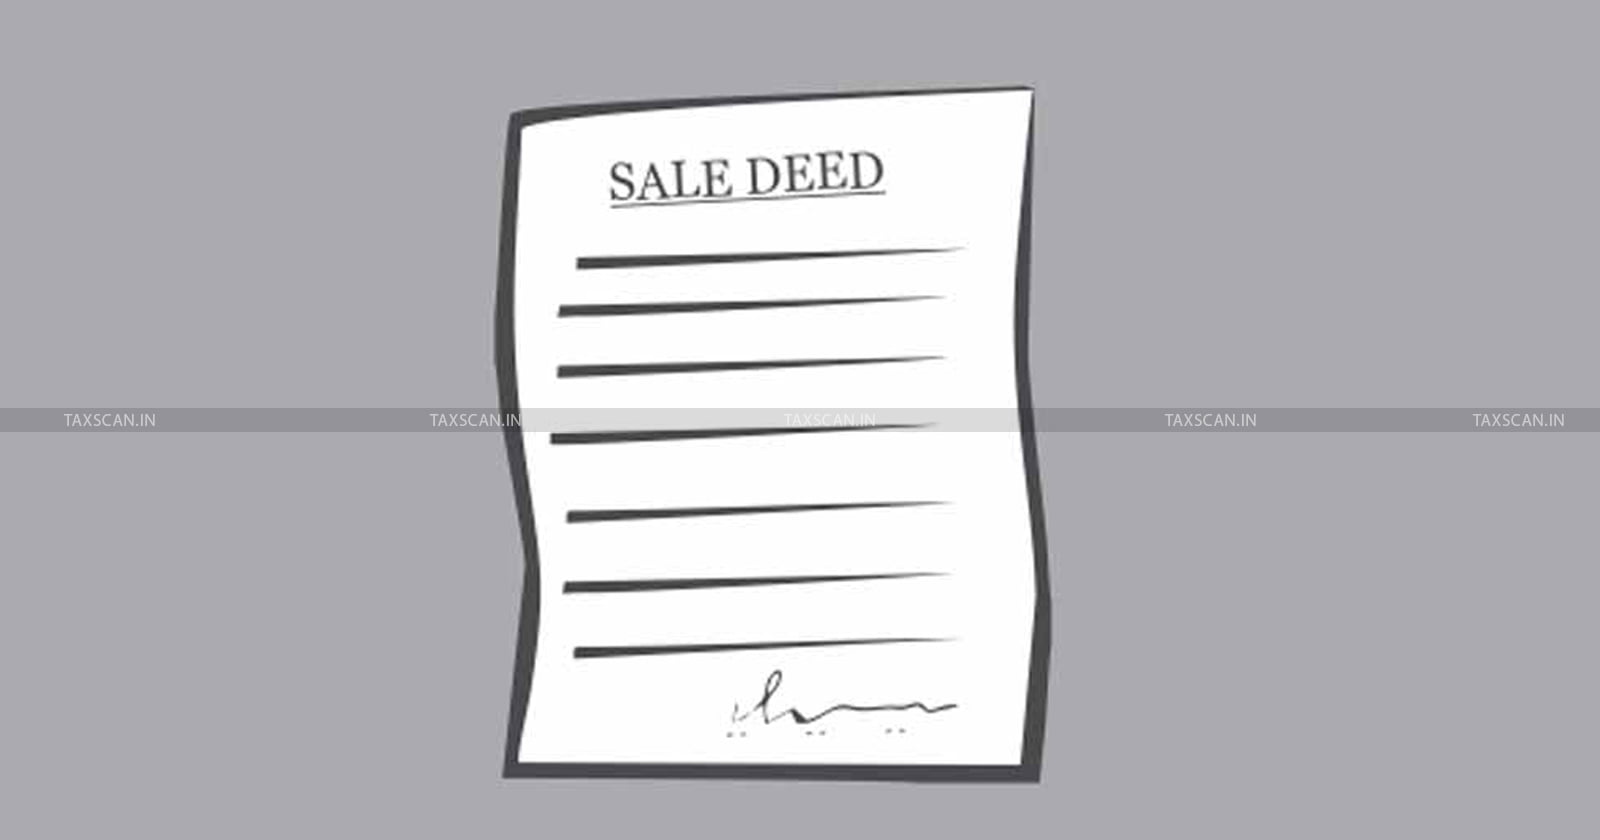 Non-Consideration - Sale Deed - determine Nature - Sold Land - Agricultural - ITAT - directs - Re-adjudication - taxscan